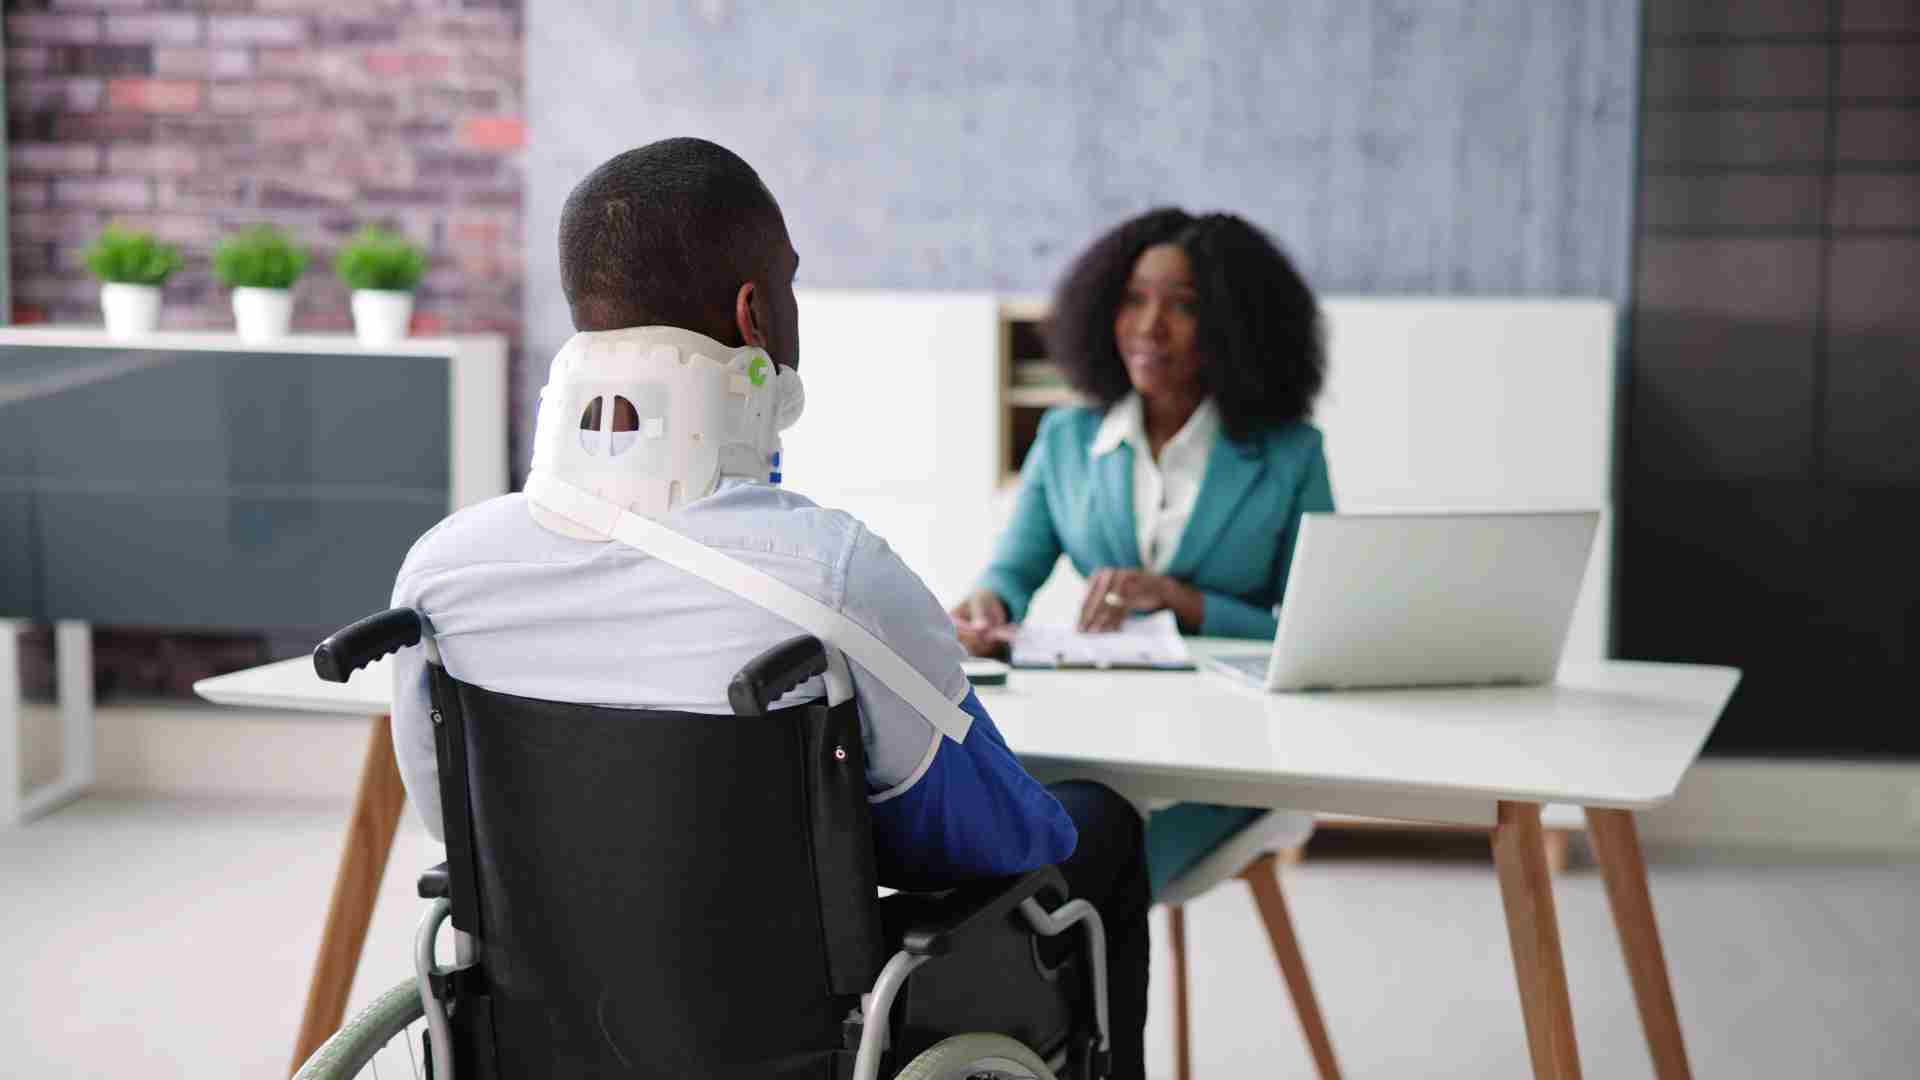 If your disability has prevented you from working for over a year, apply for Social Security Disability Insurance, SSDI payments can be of great help in the USA